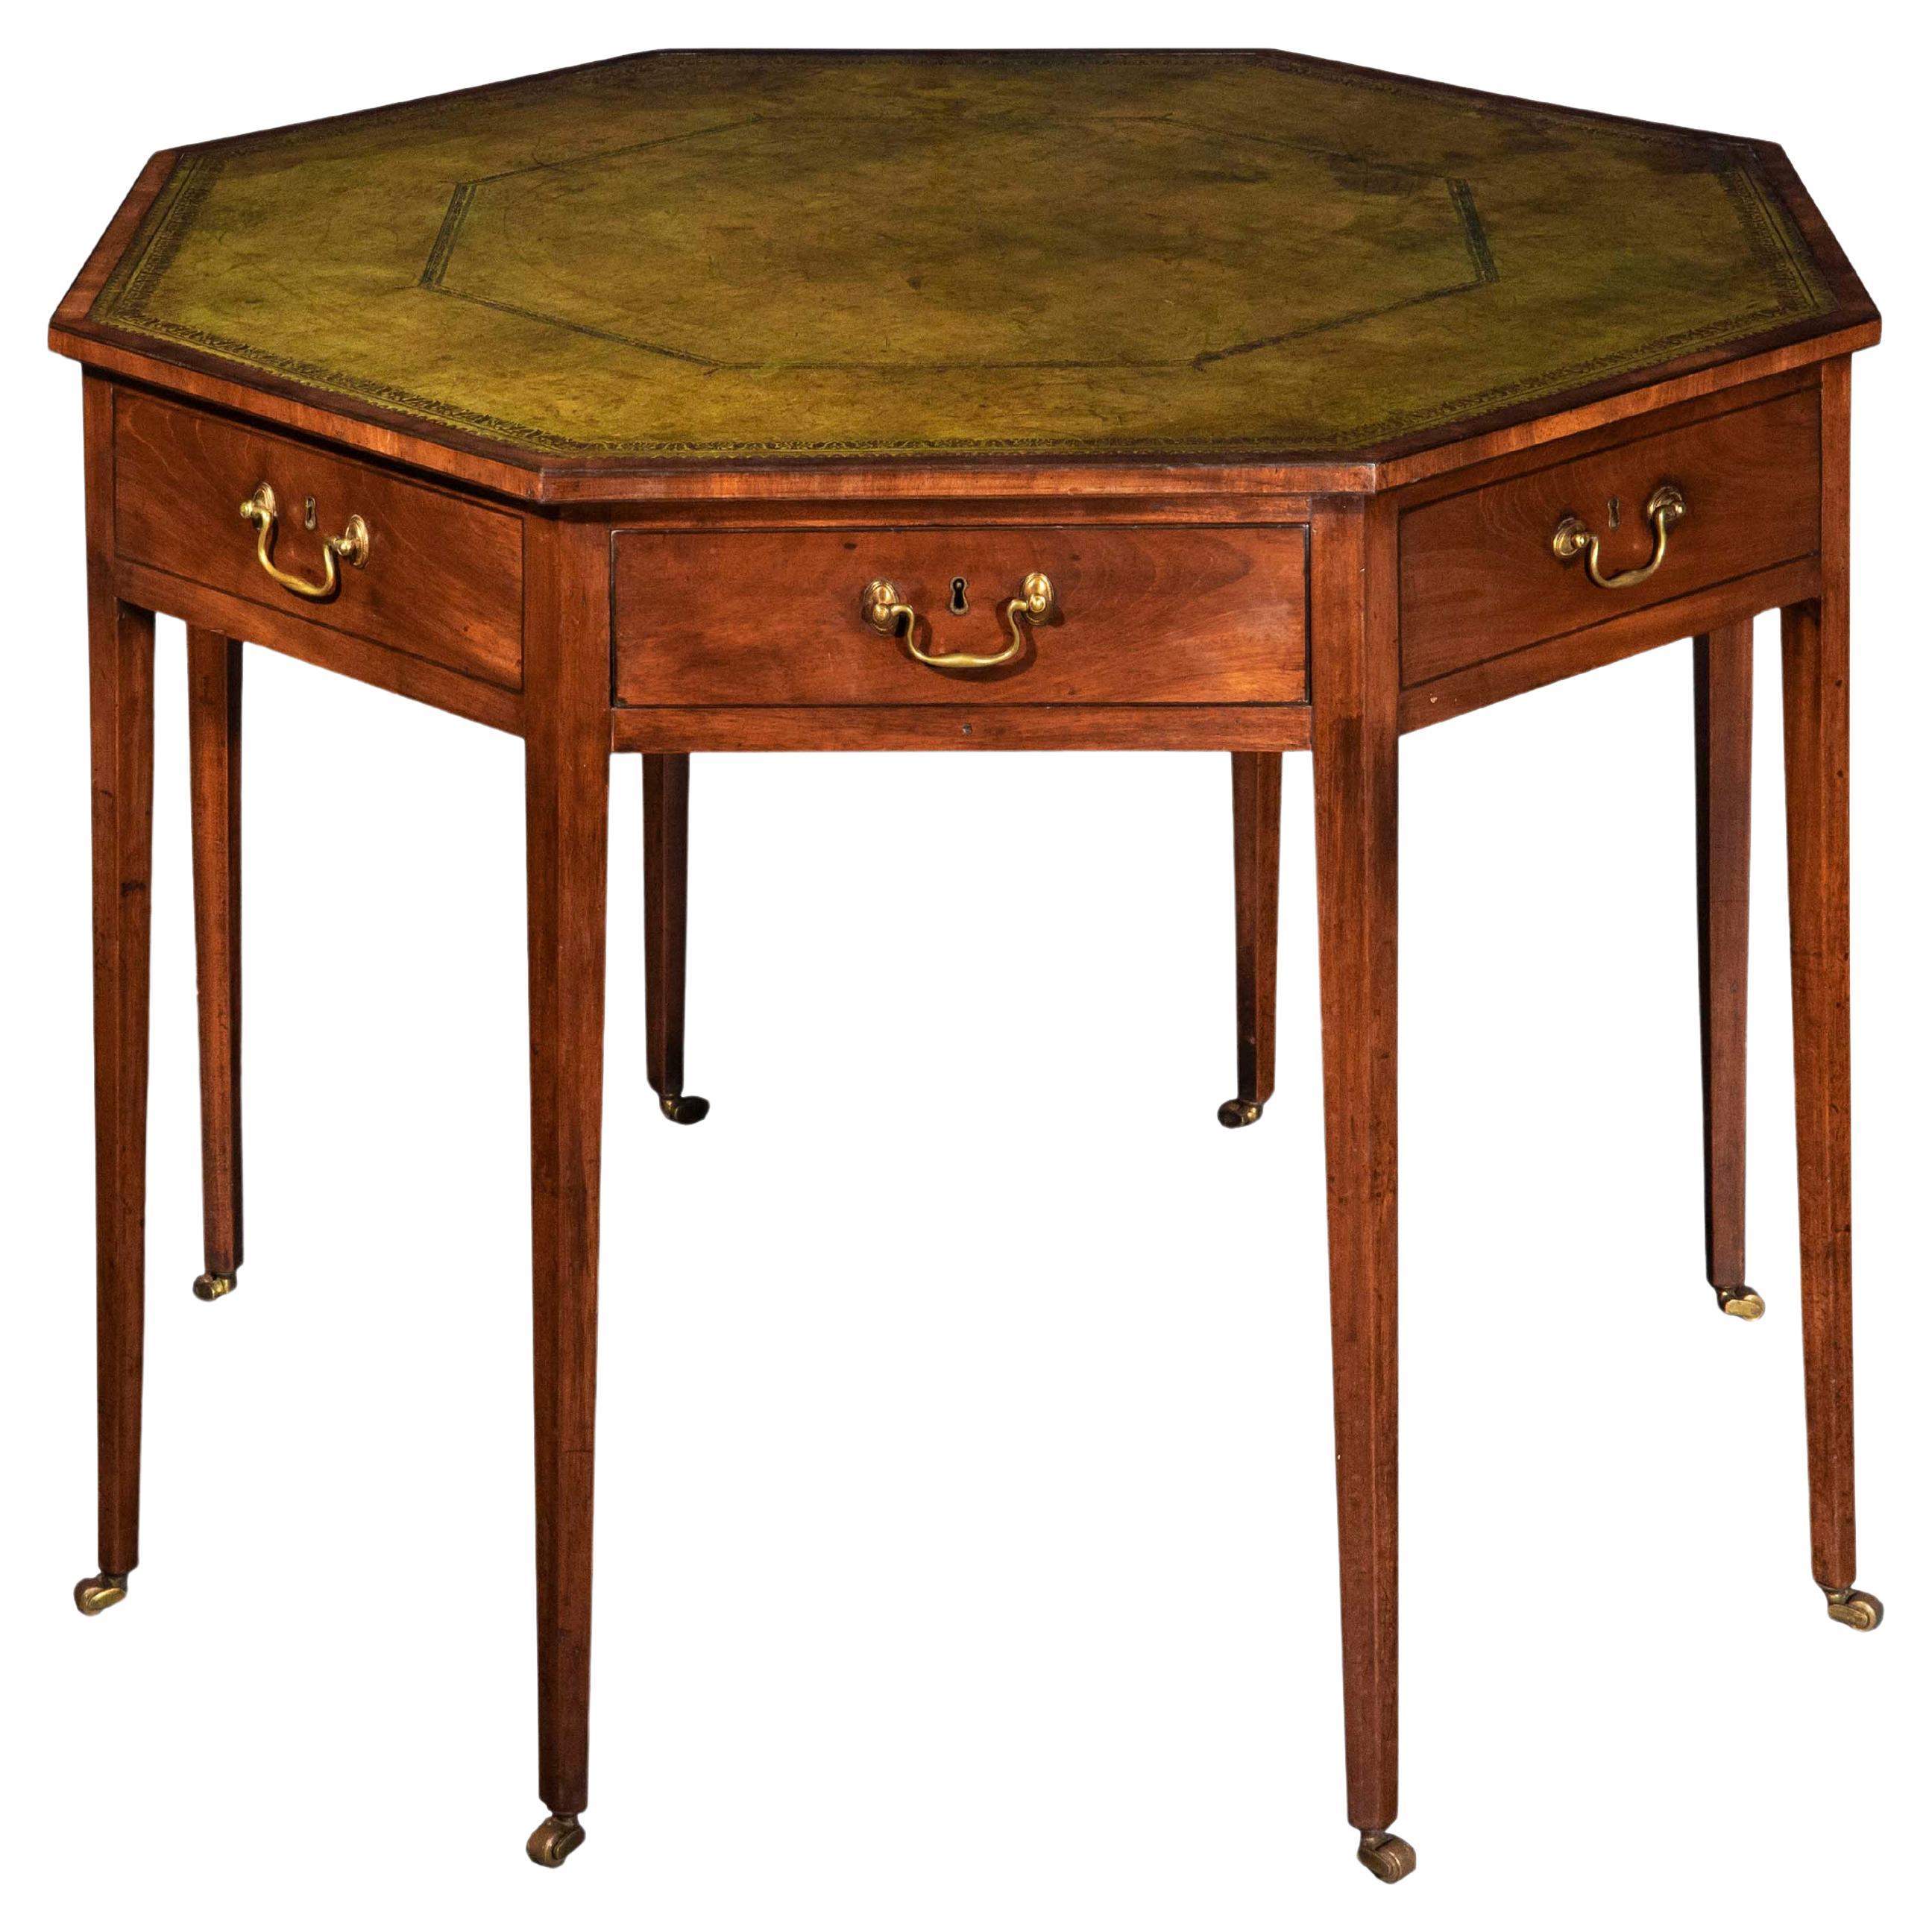 Georgian Regency Octagonal Library Table with Green Leather Top For Sale